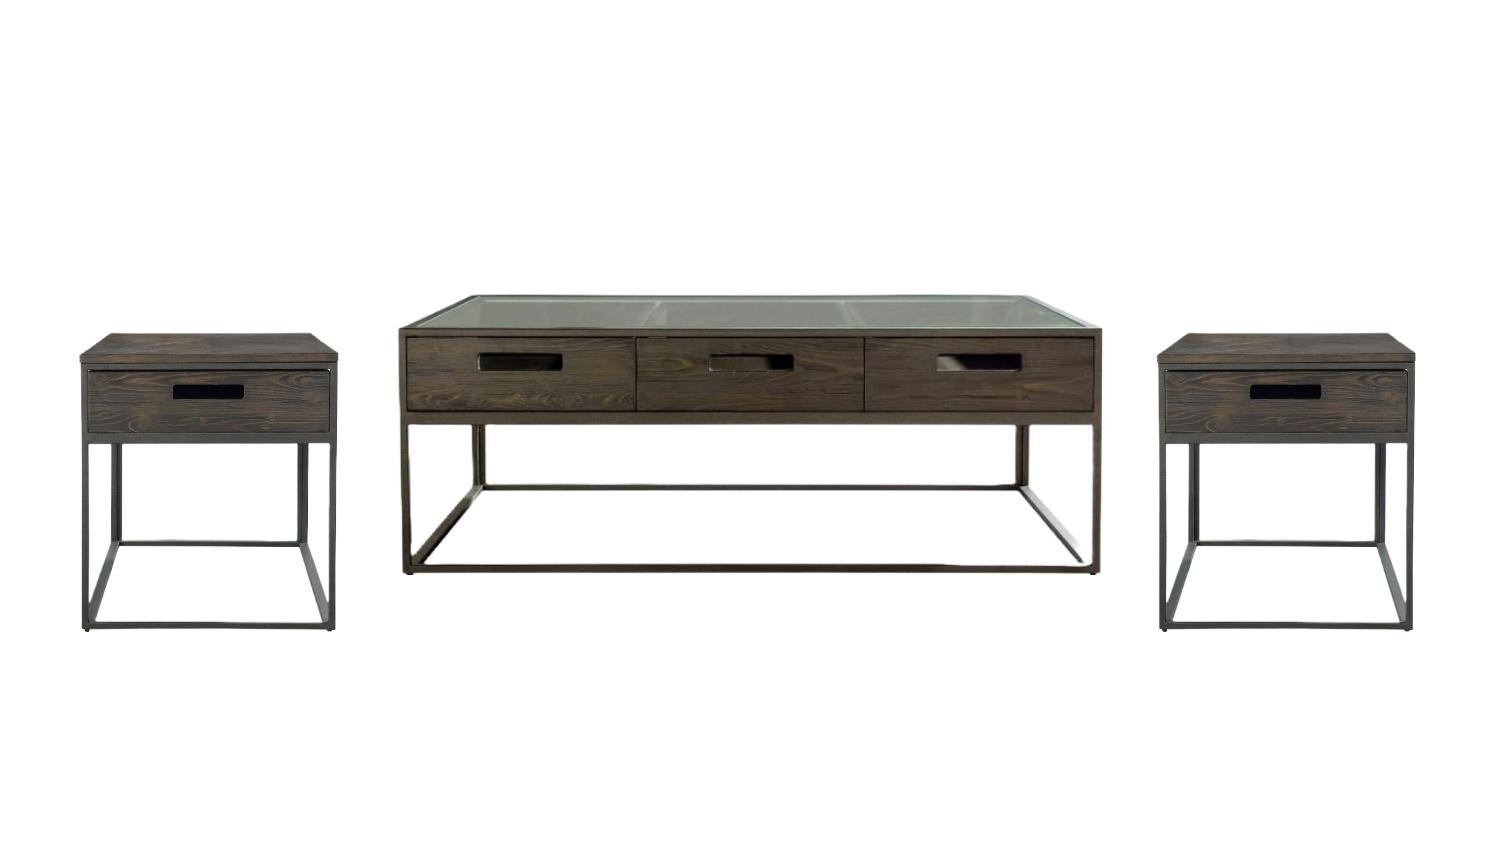 Transitional, Rustic Coffee Table and 2 End Tables Bradley 5Z8621-3pcs in Brown 